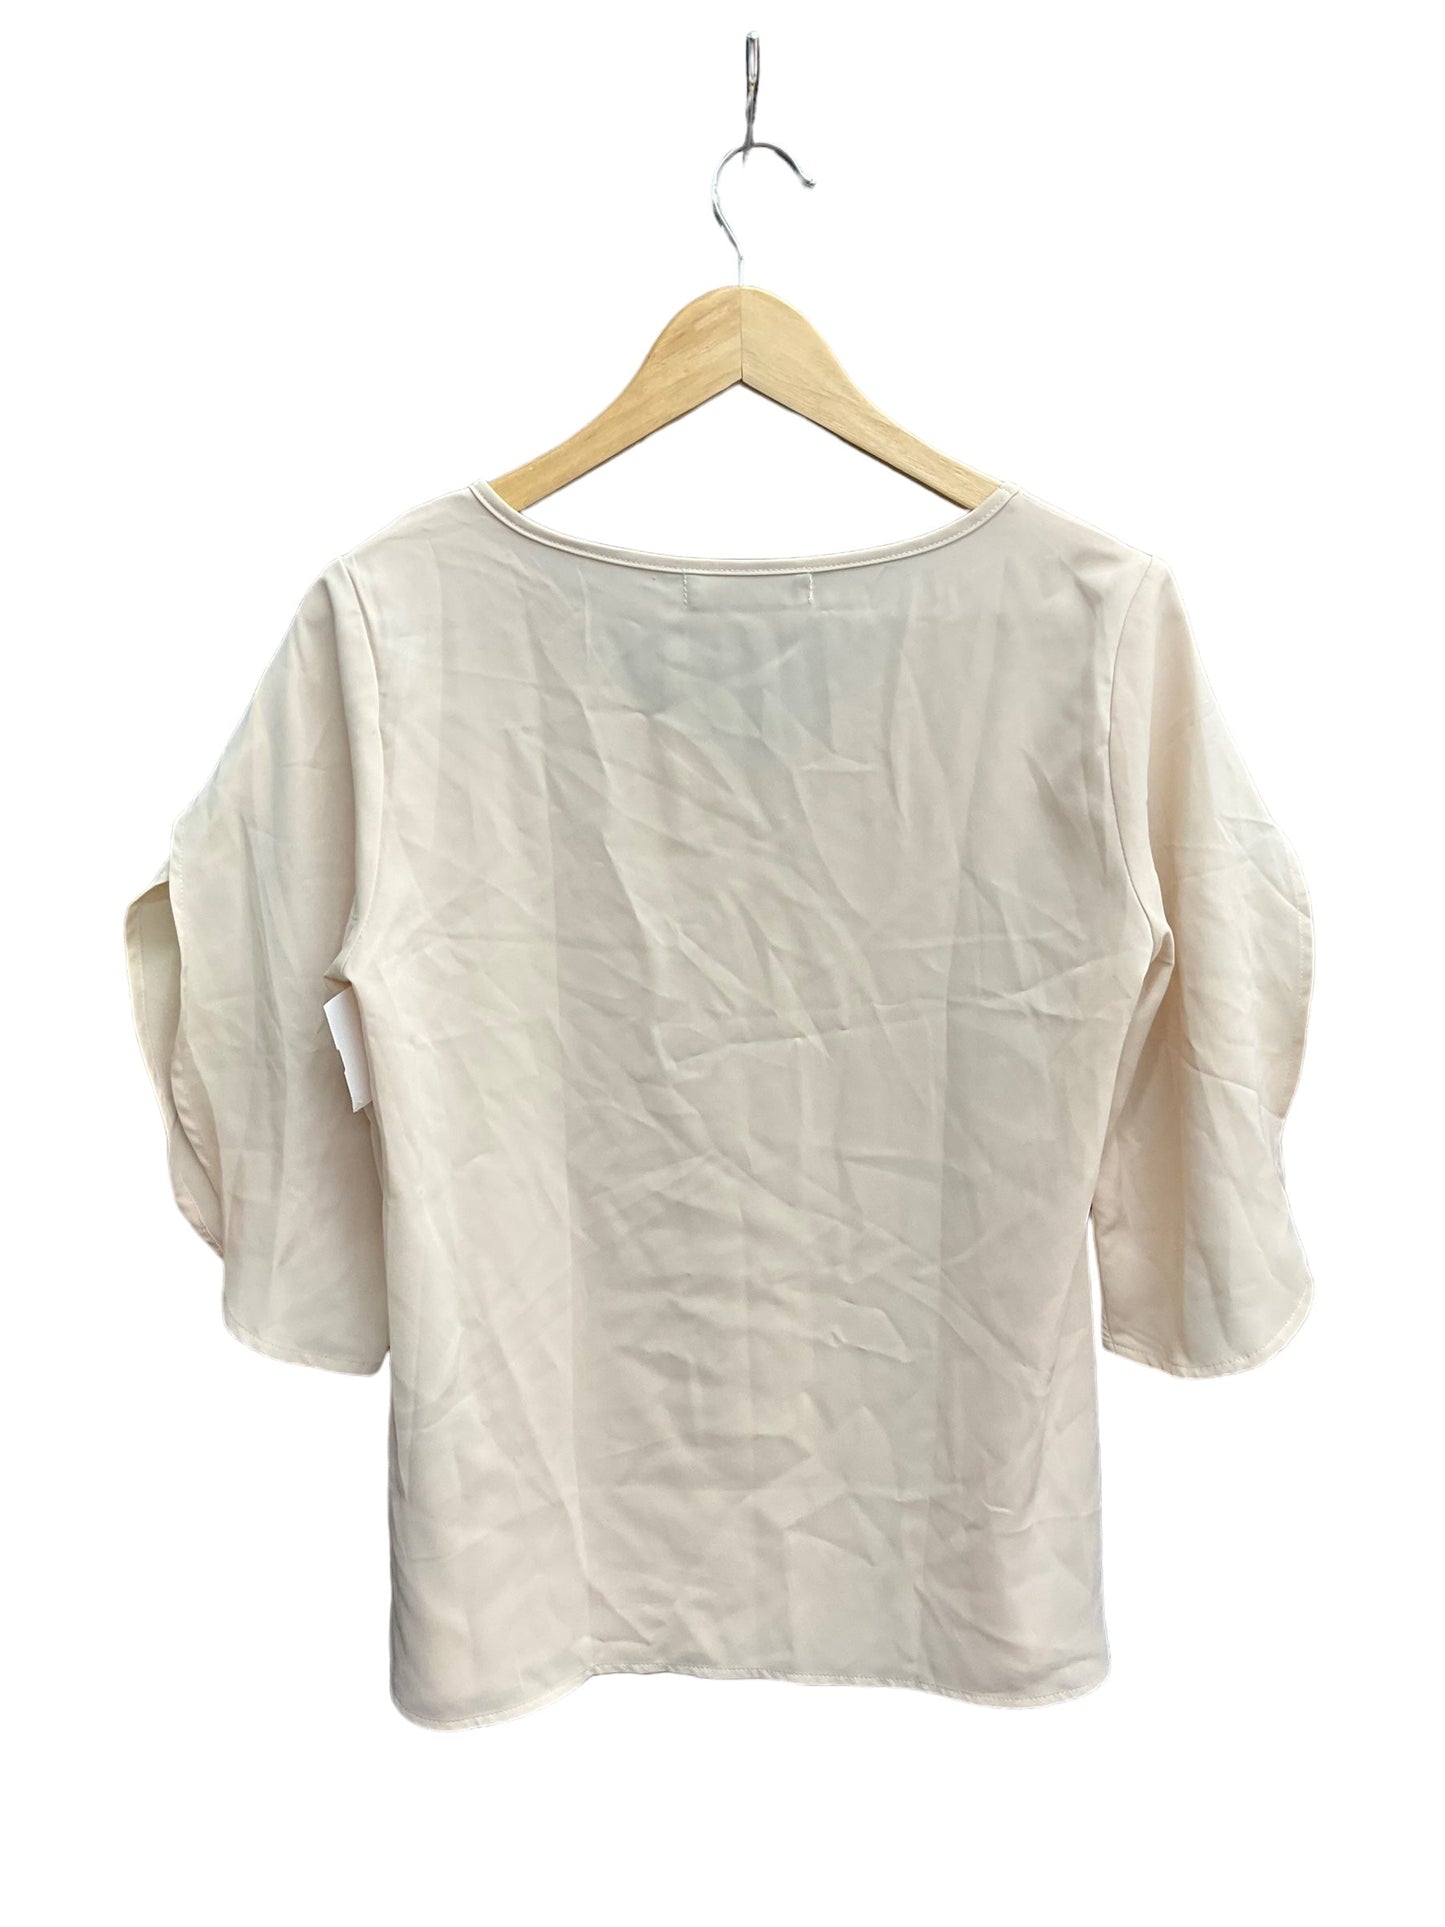 Beige Top Short Sleeve Clothes Mentor, Size S